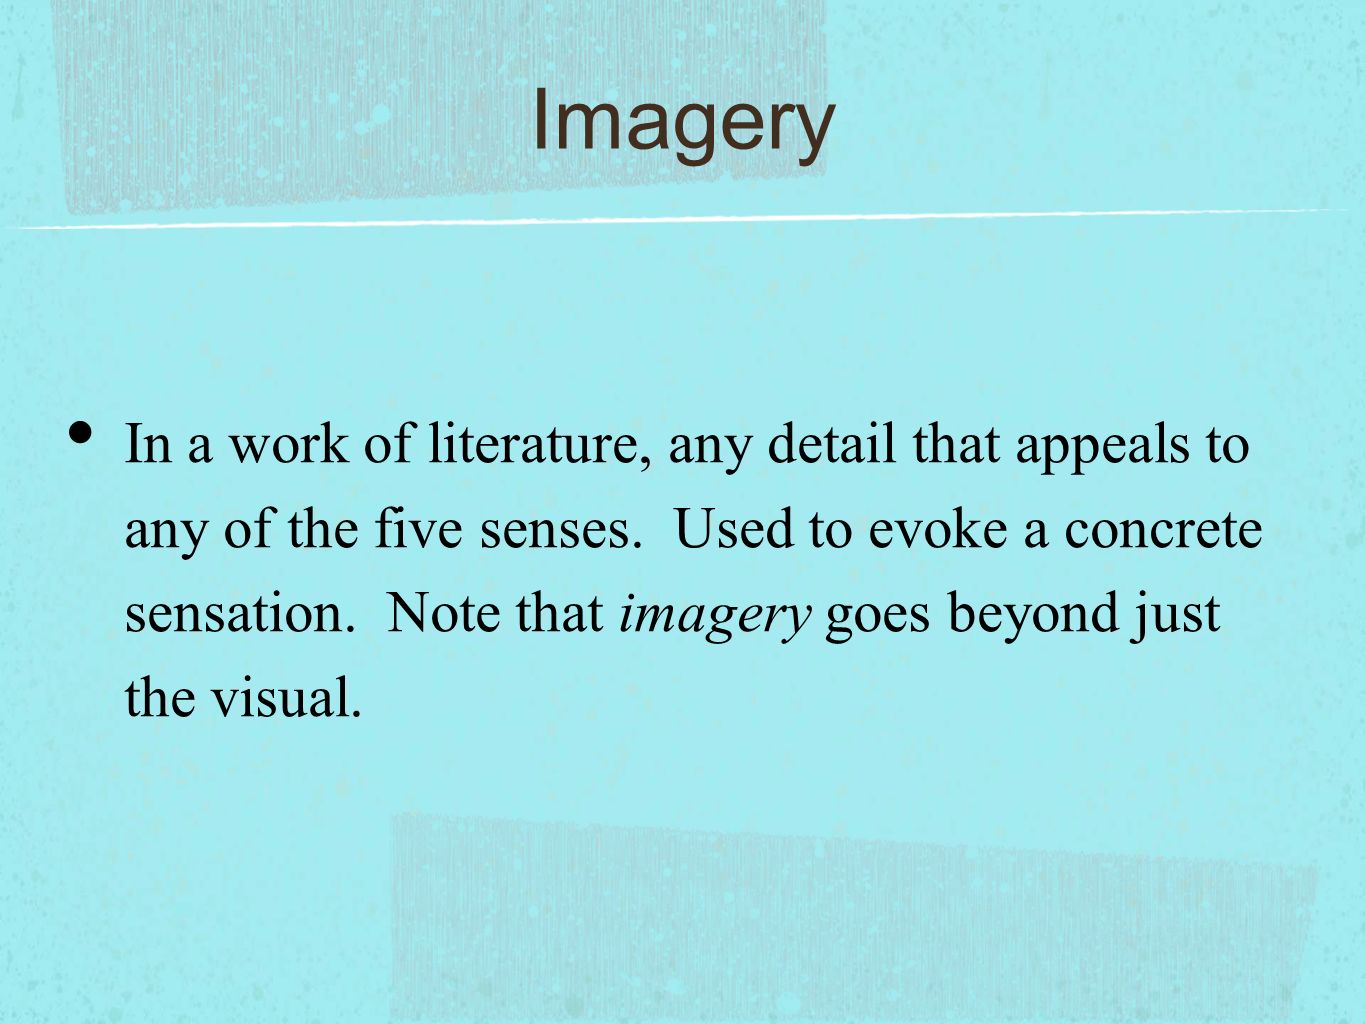 Imagery In a work of literature, any detail that appeals to any of the five senses.